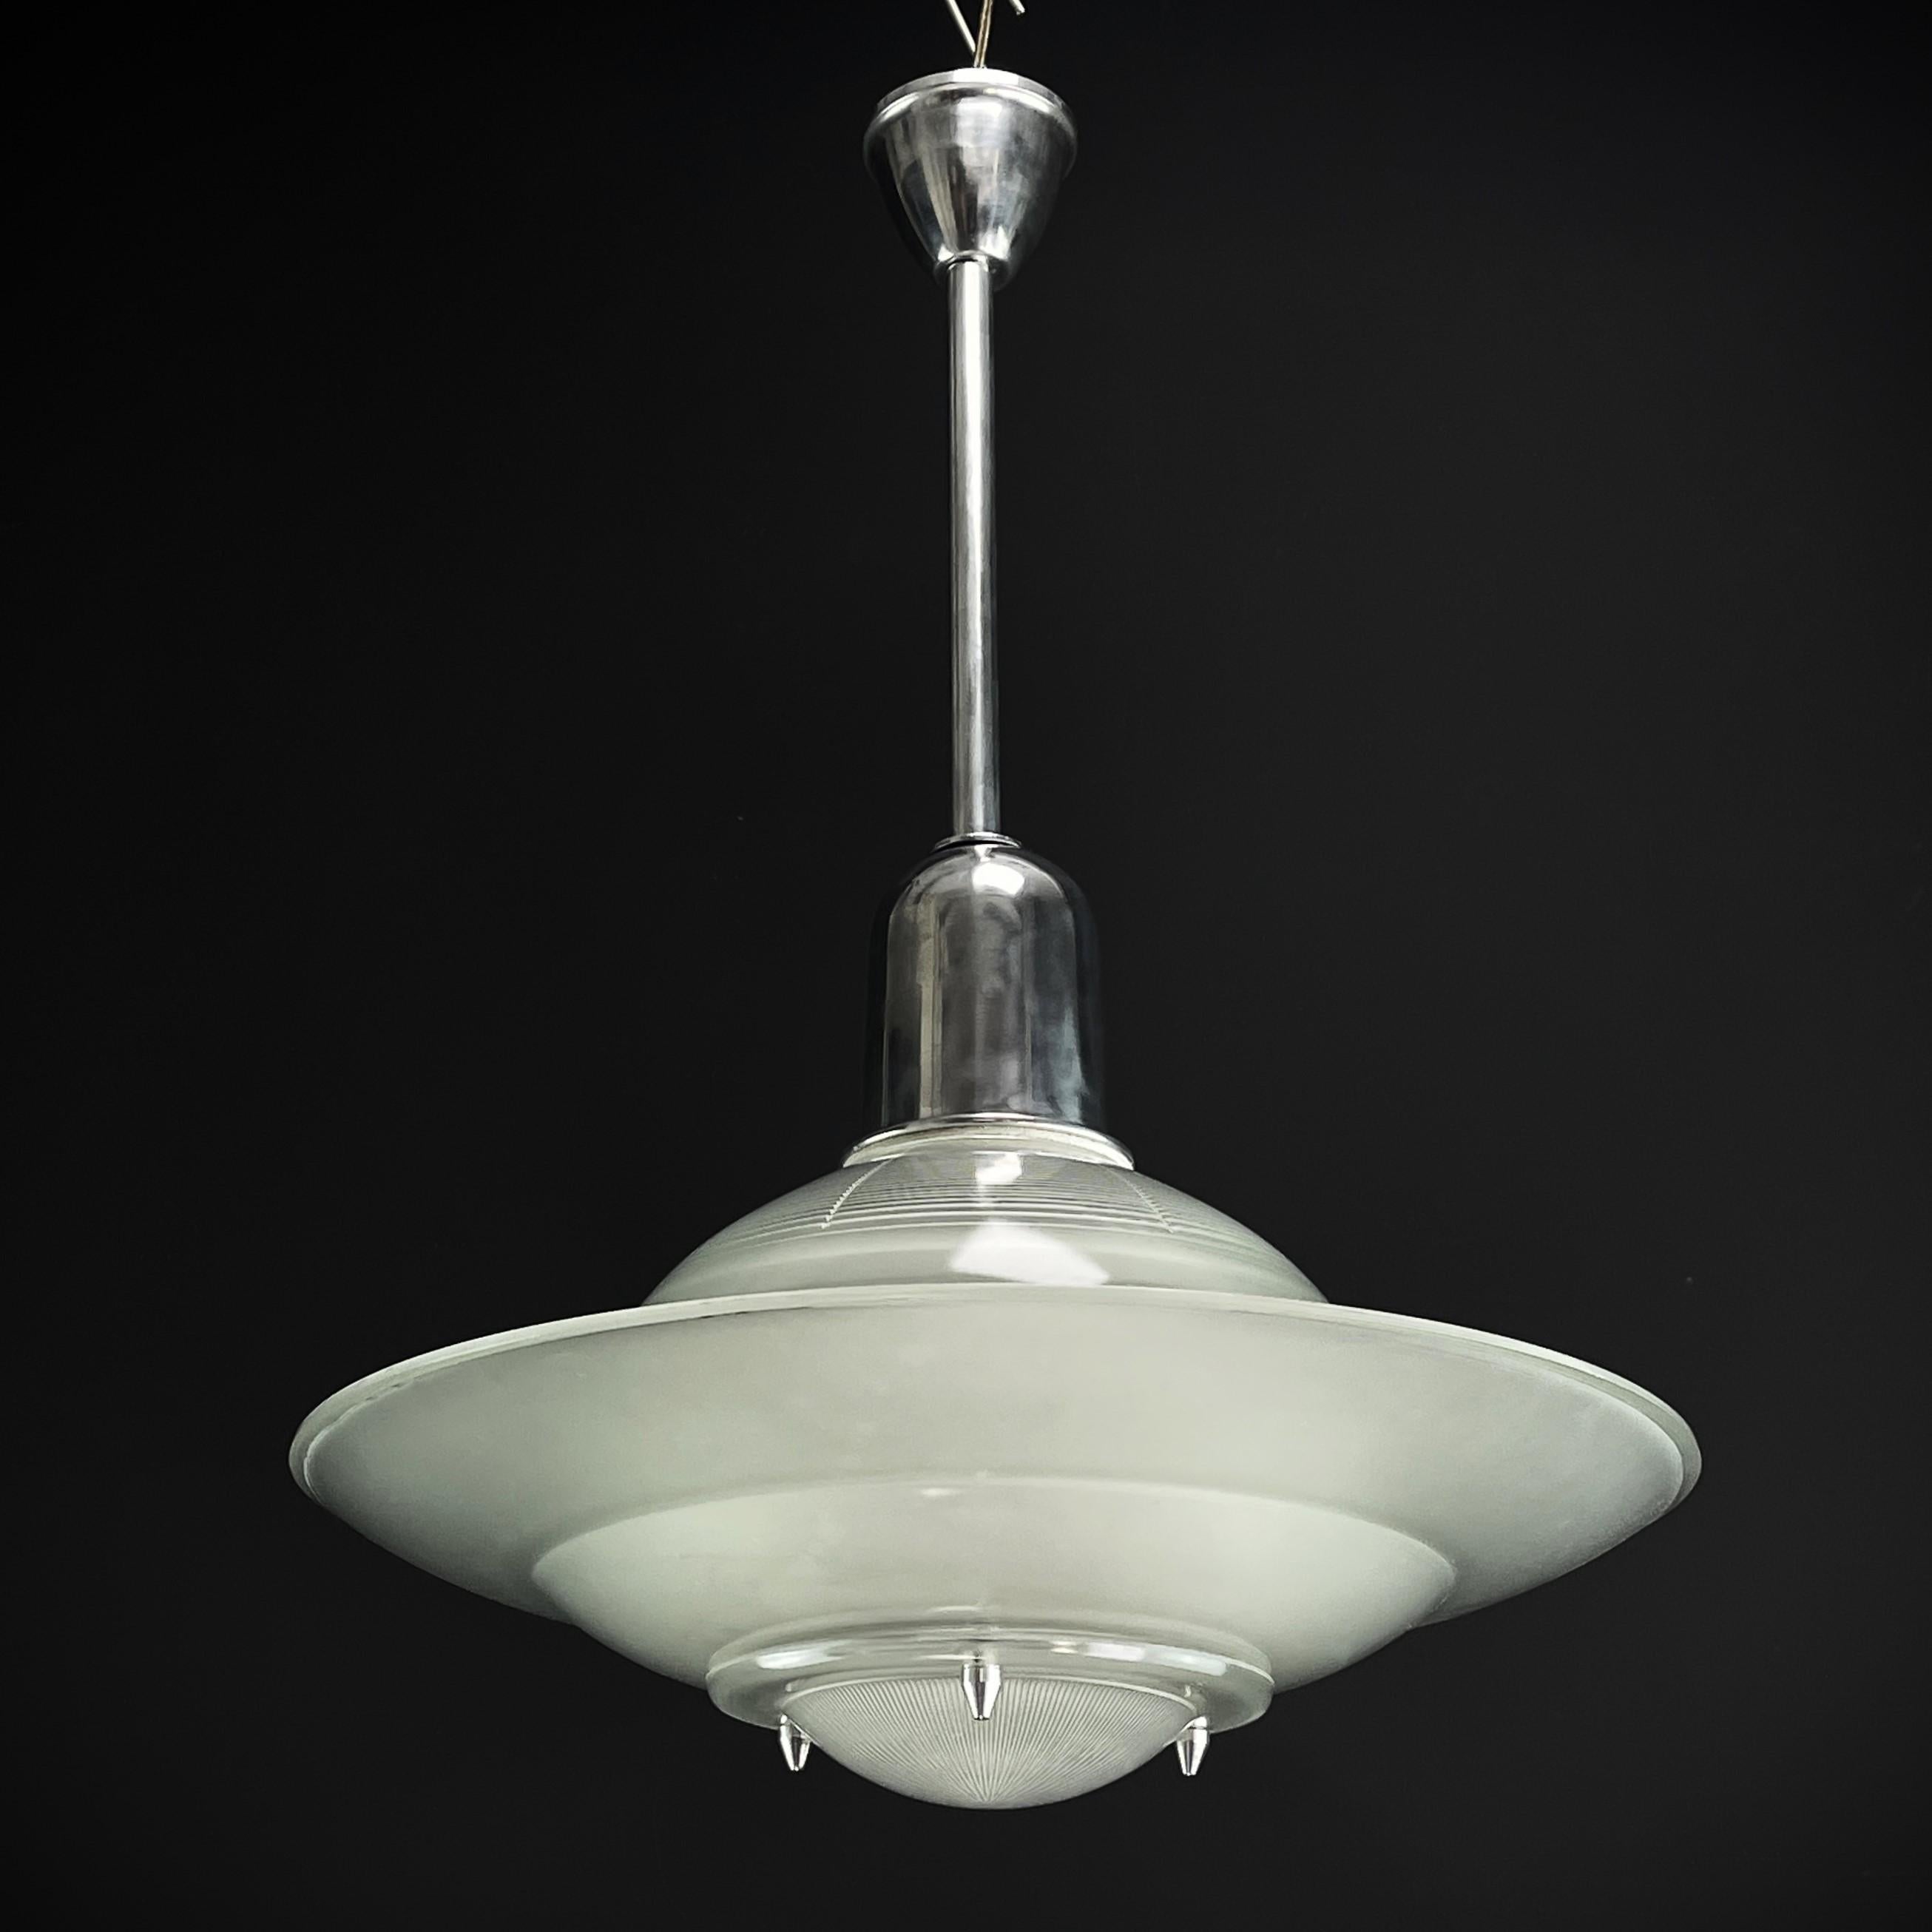 Art Deco ceiling light - 1940s

The ART DECO hanging lamp by HOLOPHANE from the 1940s is an outstanding example of Machine Age design. The characteristic feature of this HOLOPHANE hanging lamp is its unique lighting technology. The use of special